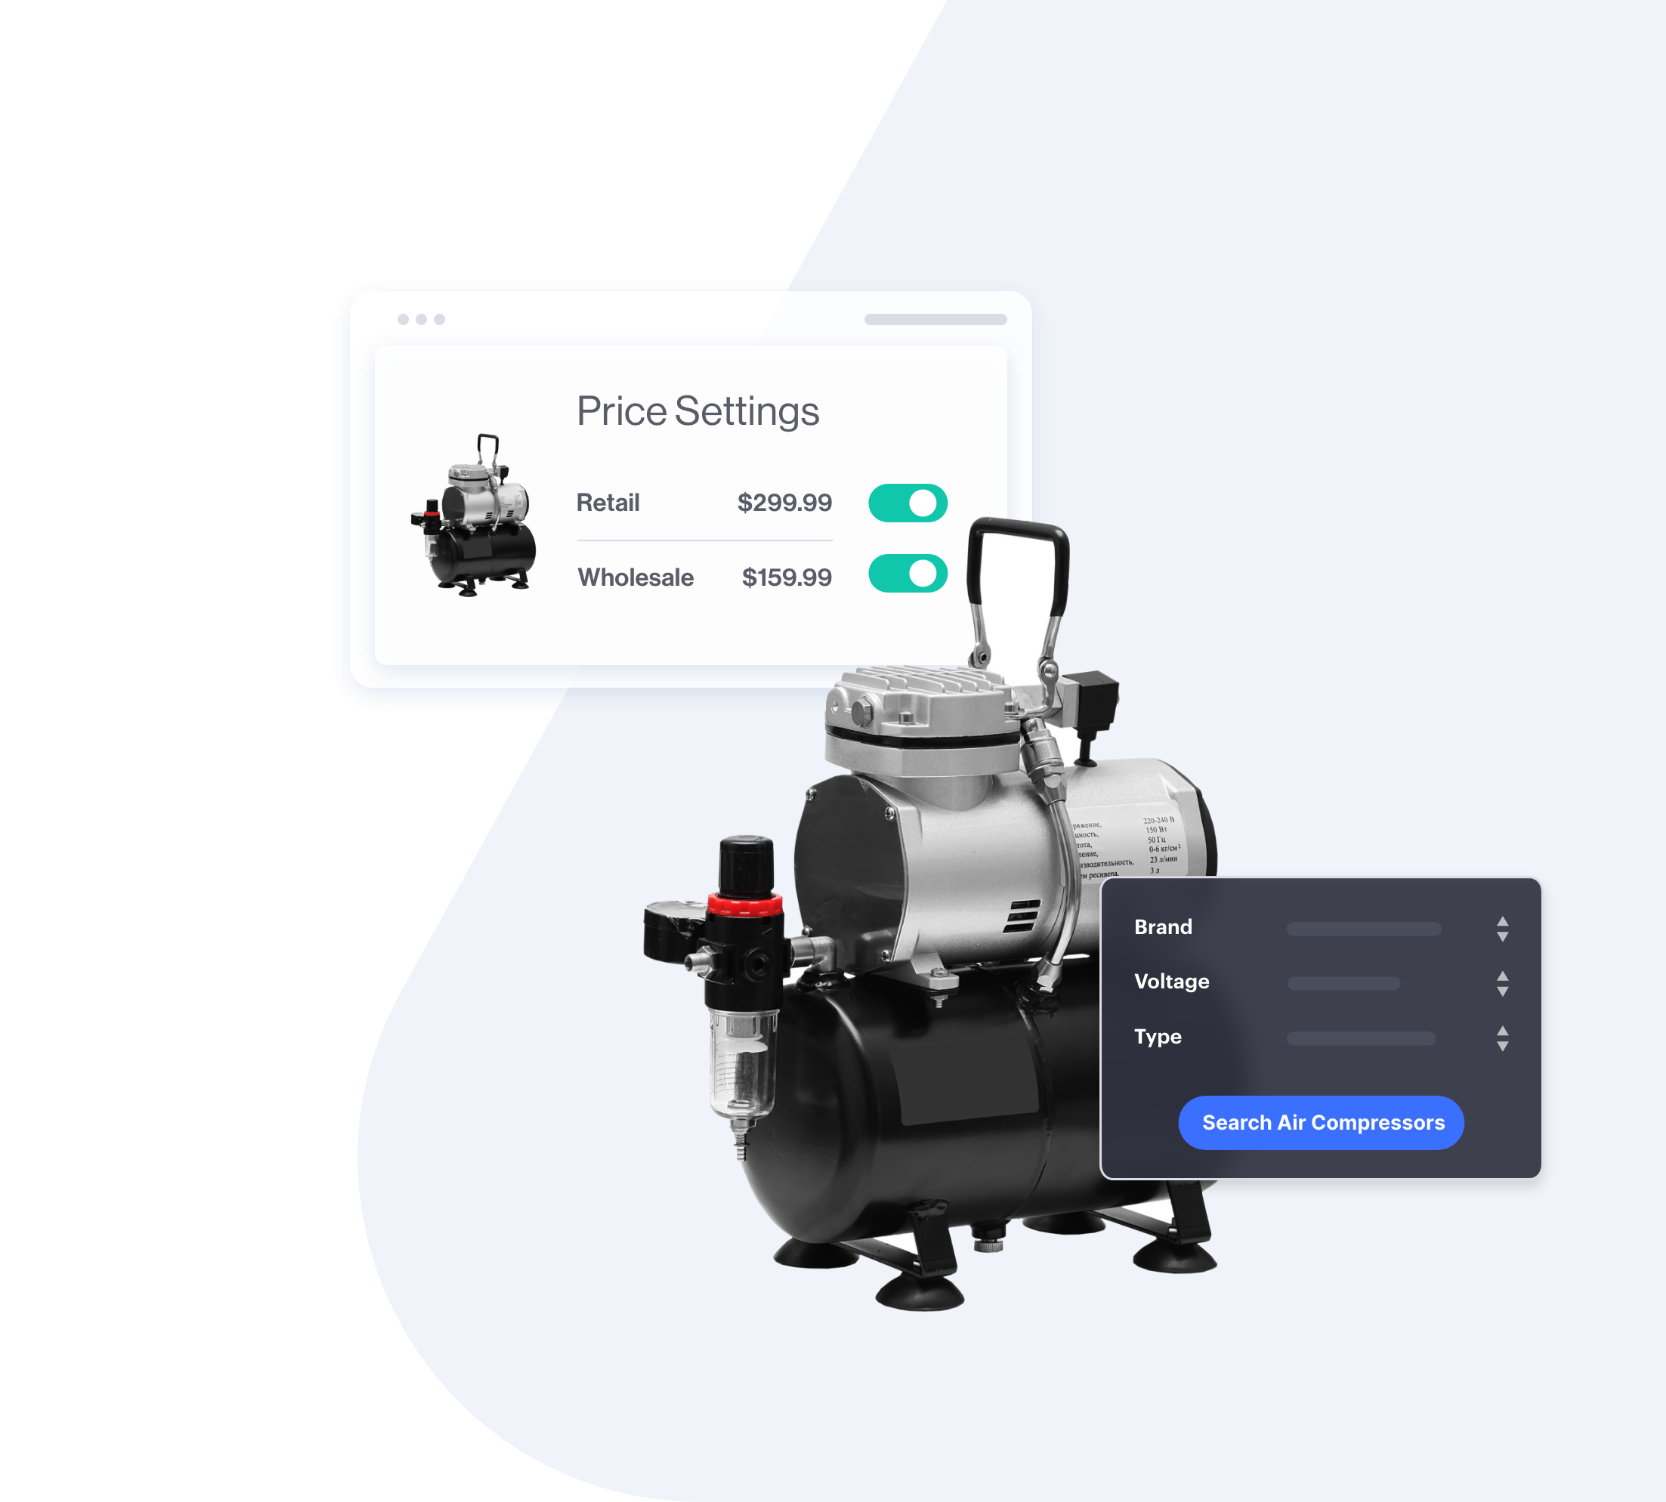 Air compressor product with backend and frontend popups of options.